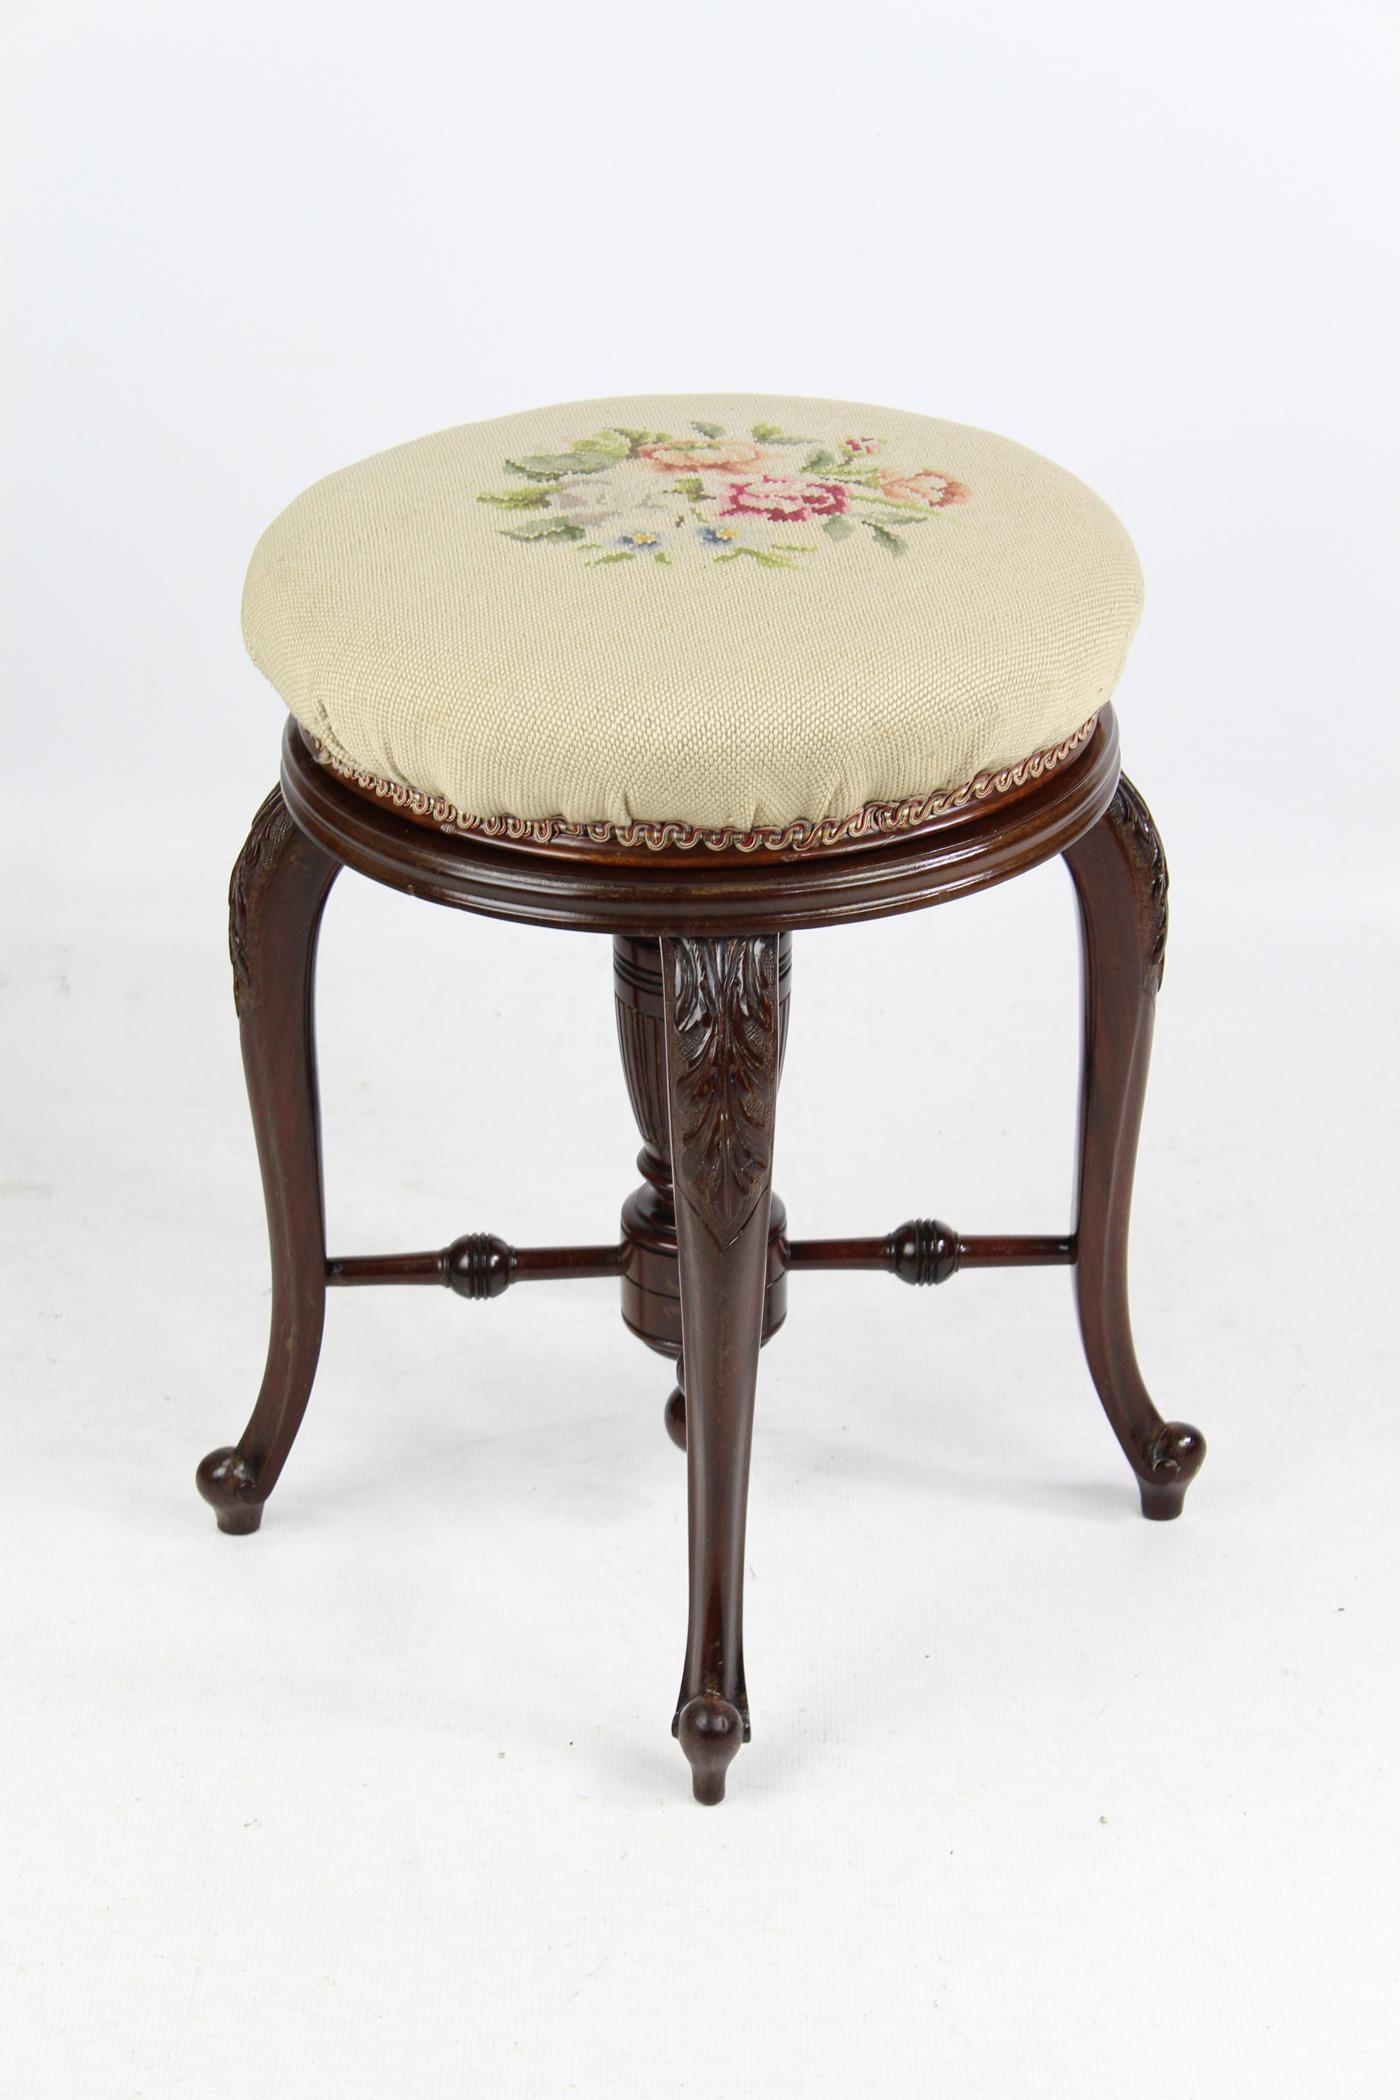 An elegant antique late Victorian mahogany revolving piano stool, stamped J Fitter Birmingham dating from circa 1900. With an oval stuff over top upholstered in floral gros point which raises up on a brass thread. It stands on four acanthus carved